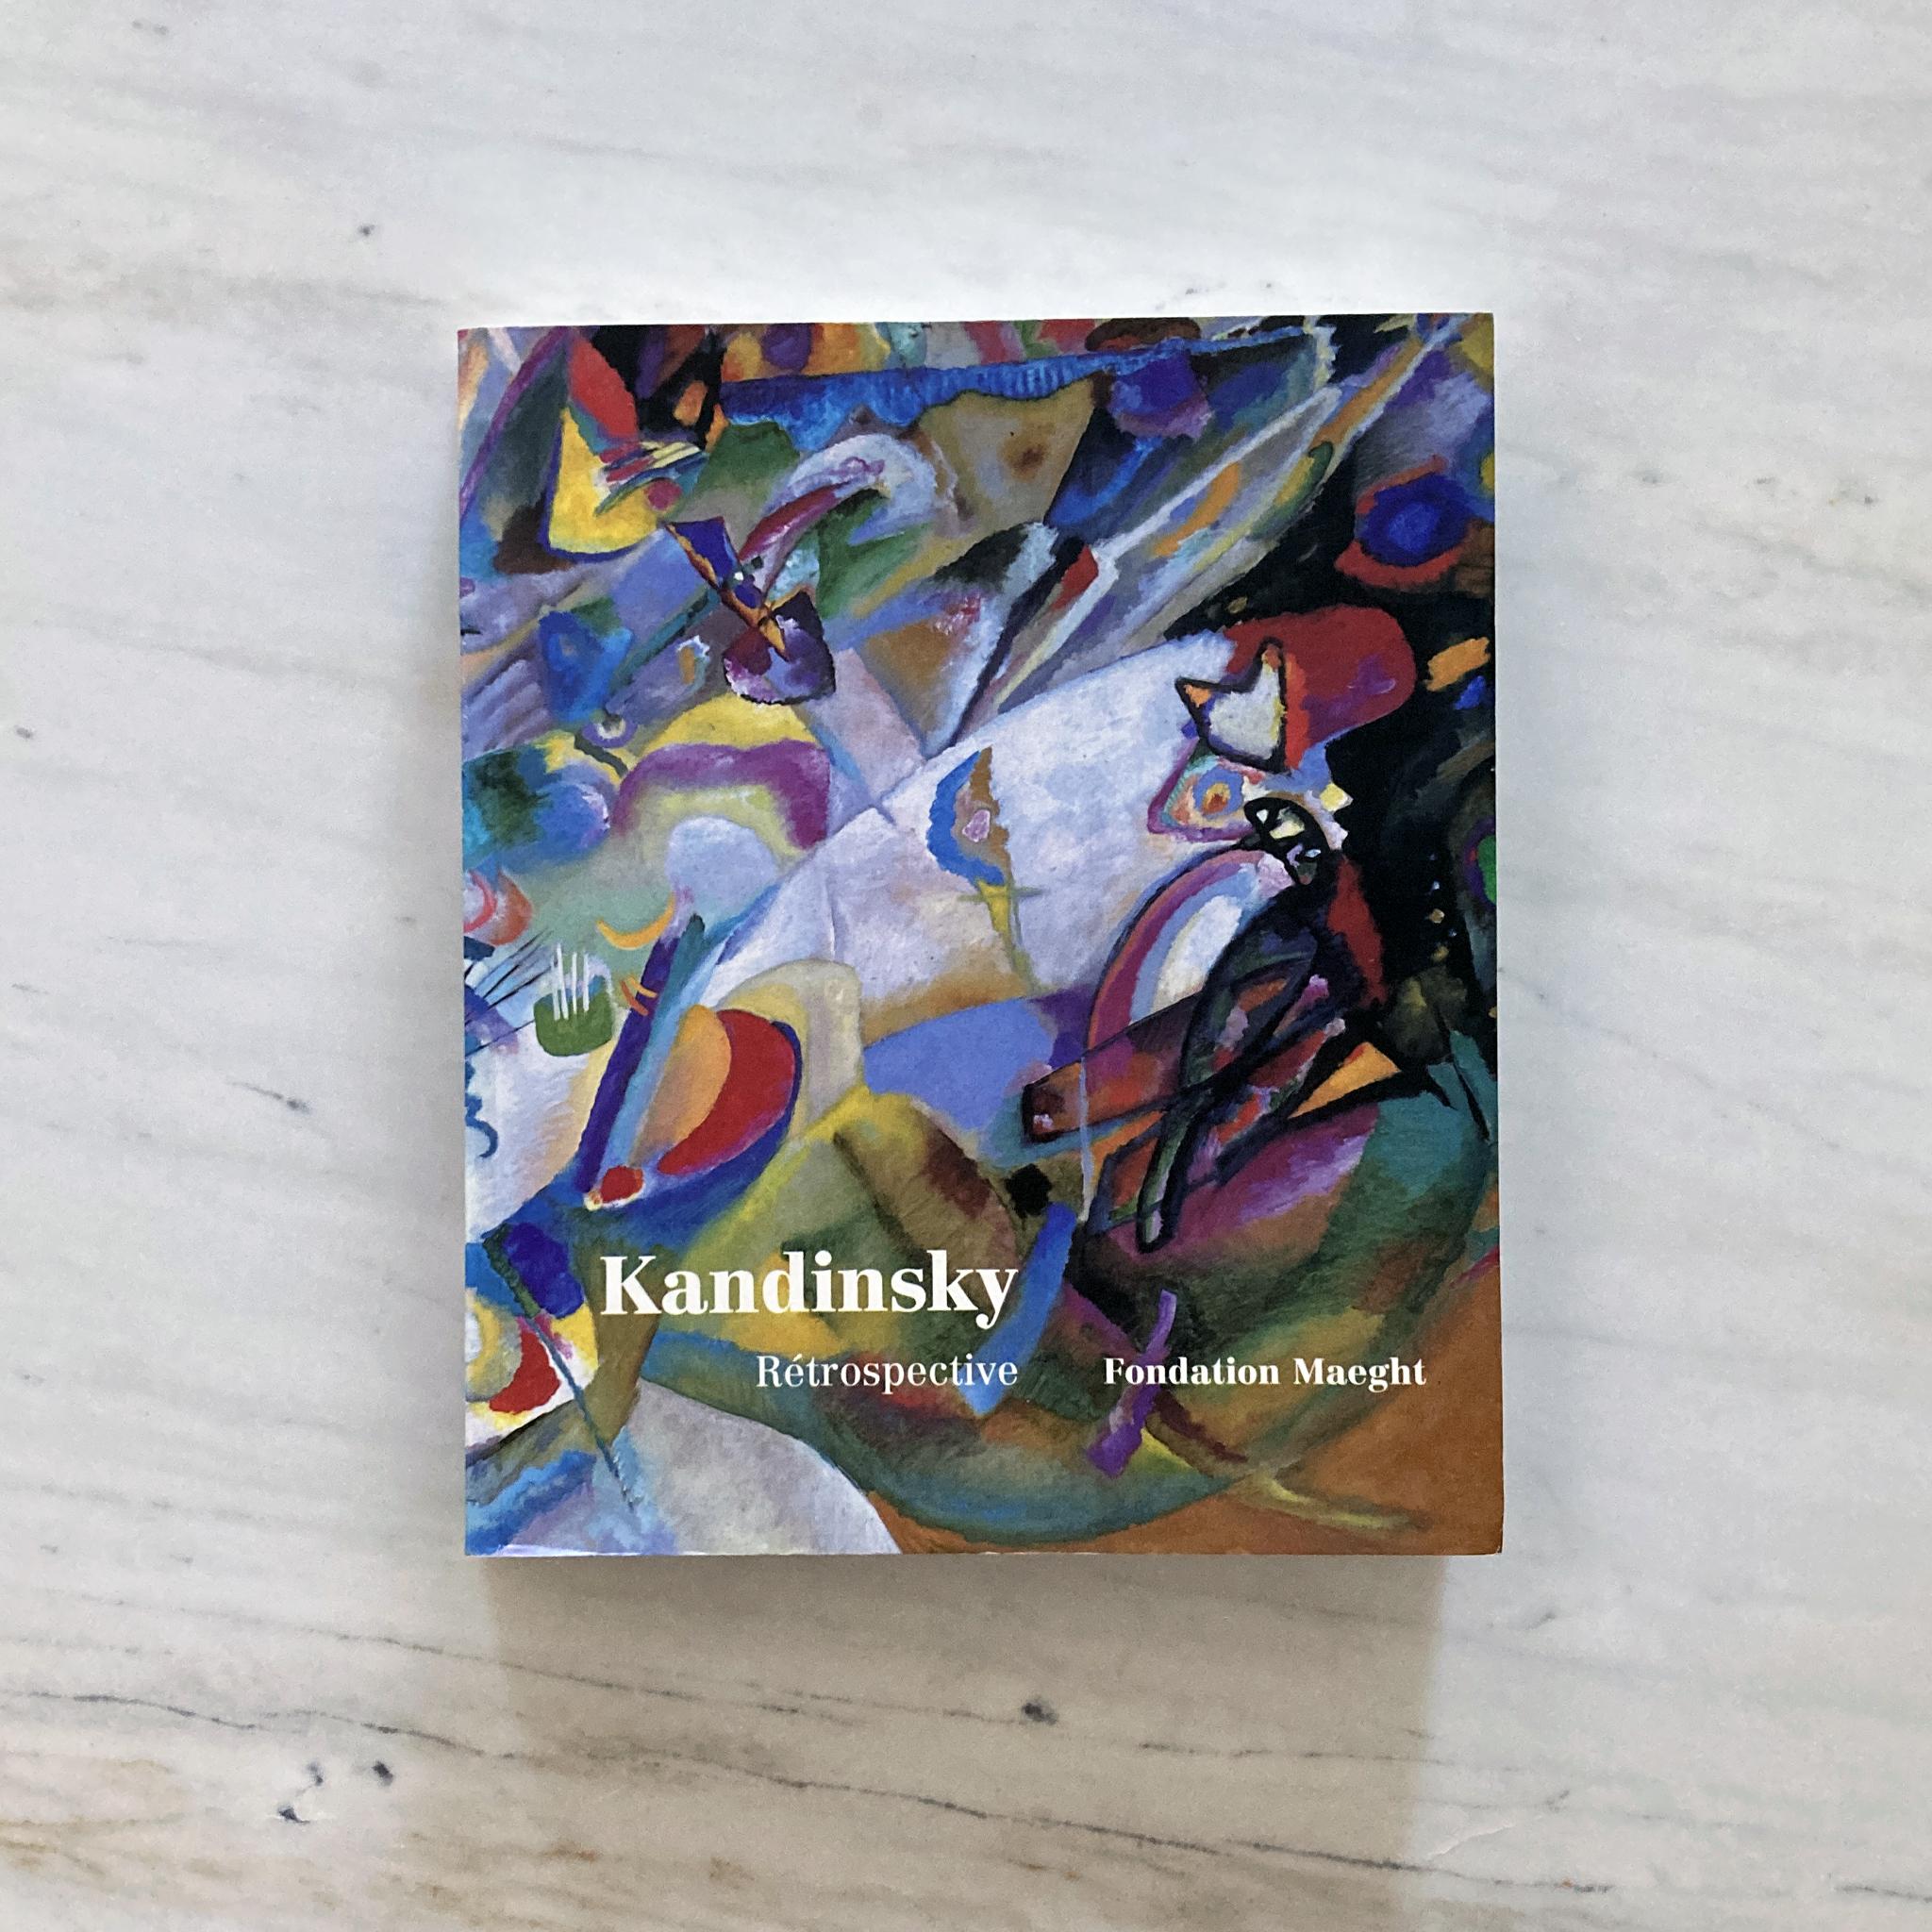 Exhibition book from the Kandinsky Rétrospective in 2001 at Fondation Maeght in Saint-Paul de Vence, France. An engaging and interesting coffee table book, makes a great gift to an art lover. All text is in French.

La Fondation Maeght was opened on